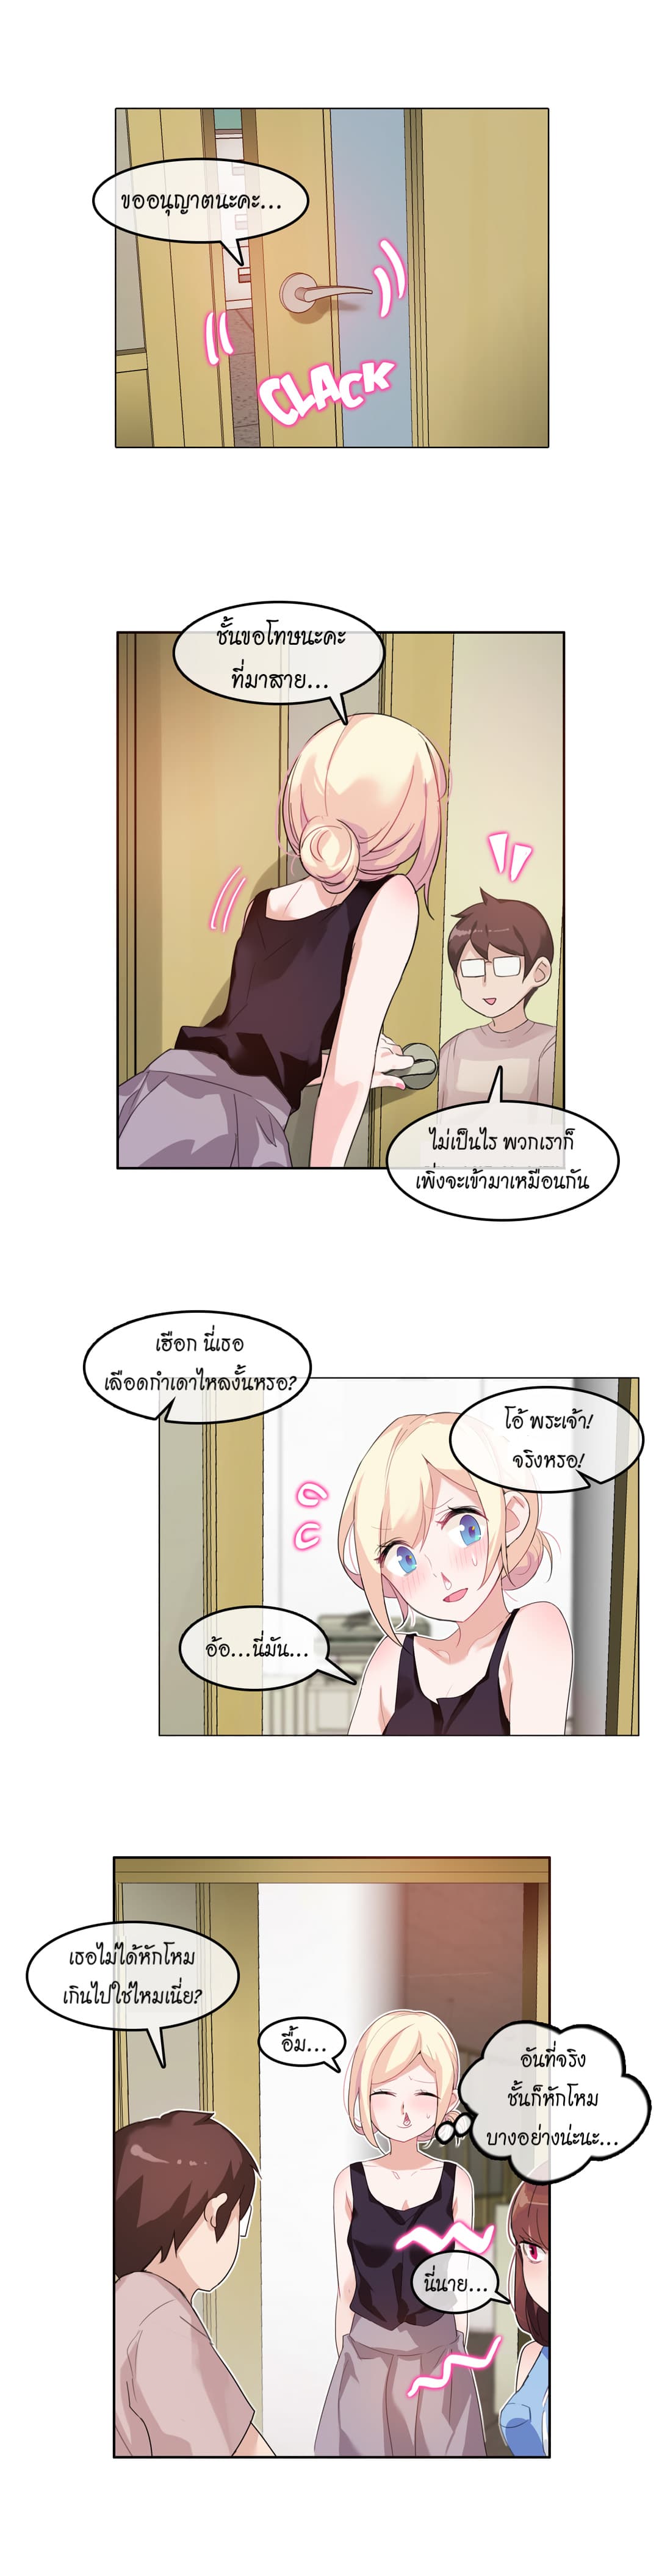 A Pervert’s Daily Life 6 (1)